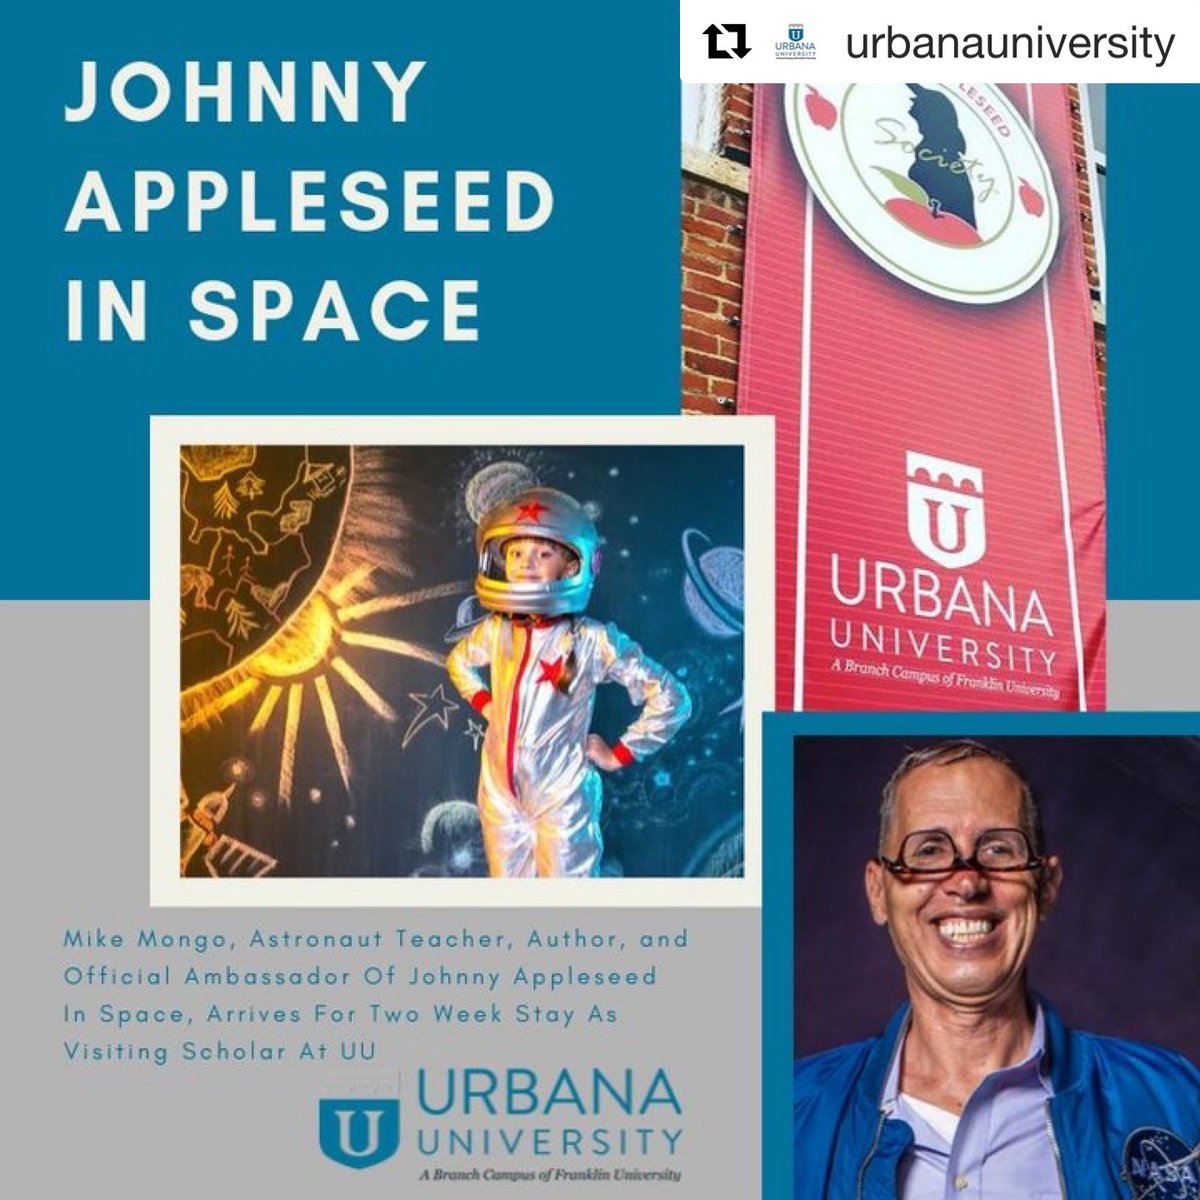 My residency at Urbana U was one fantastic moment after another. Enrolling students into creating a  @sedsusa chapter. Sharing  @ulalaunch. Revitalizing interest in the importance and legacy of American frontier legend Johnny Appleseed. Inspiring students into space careers.